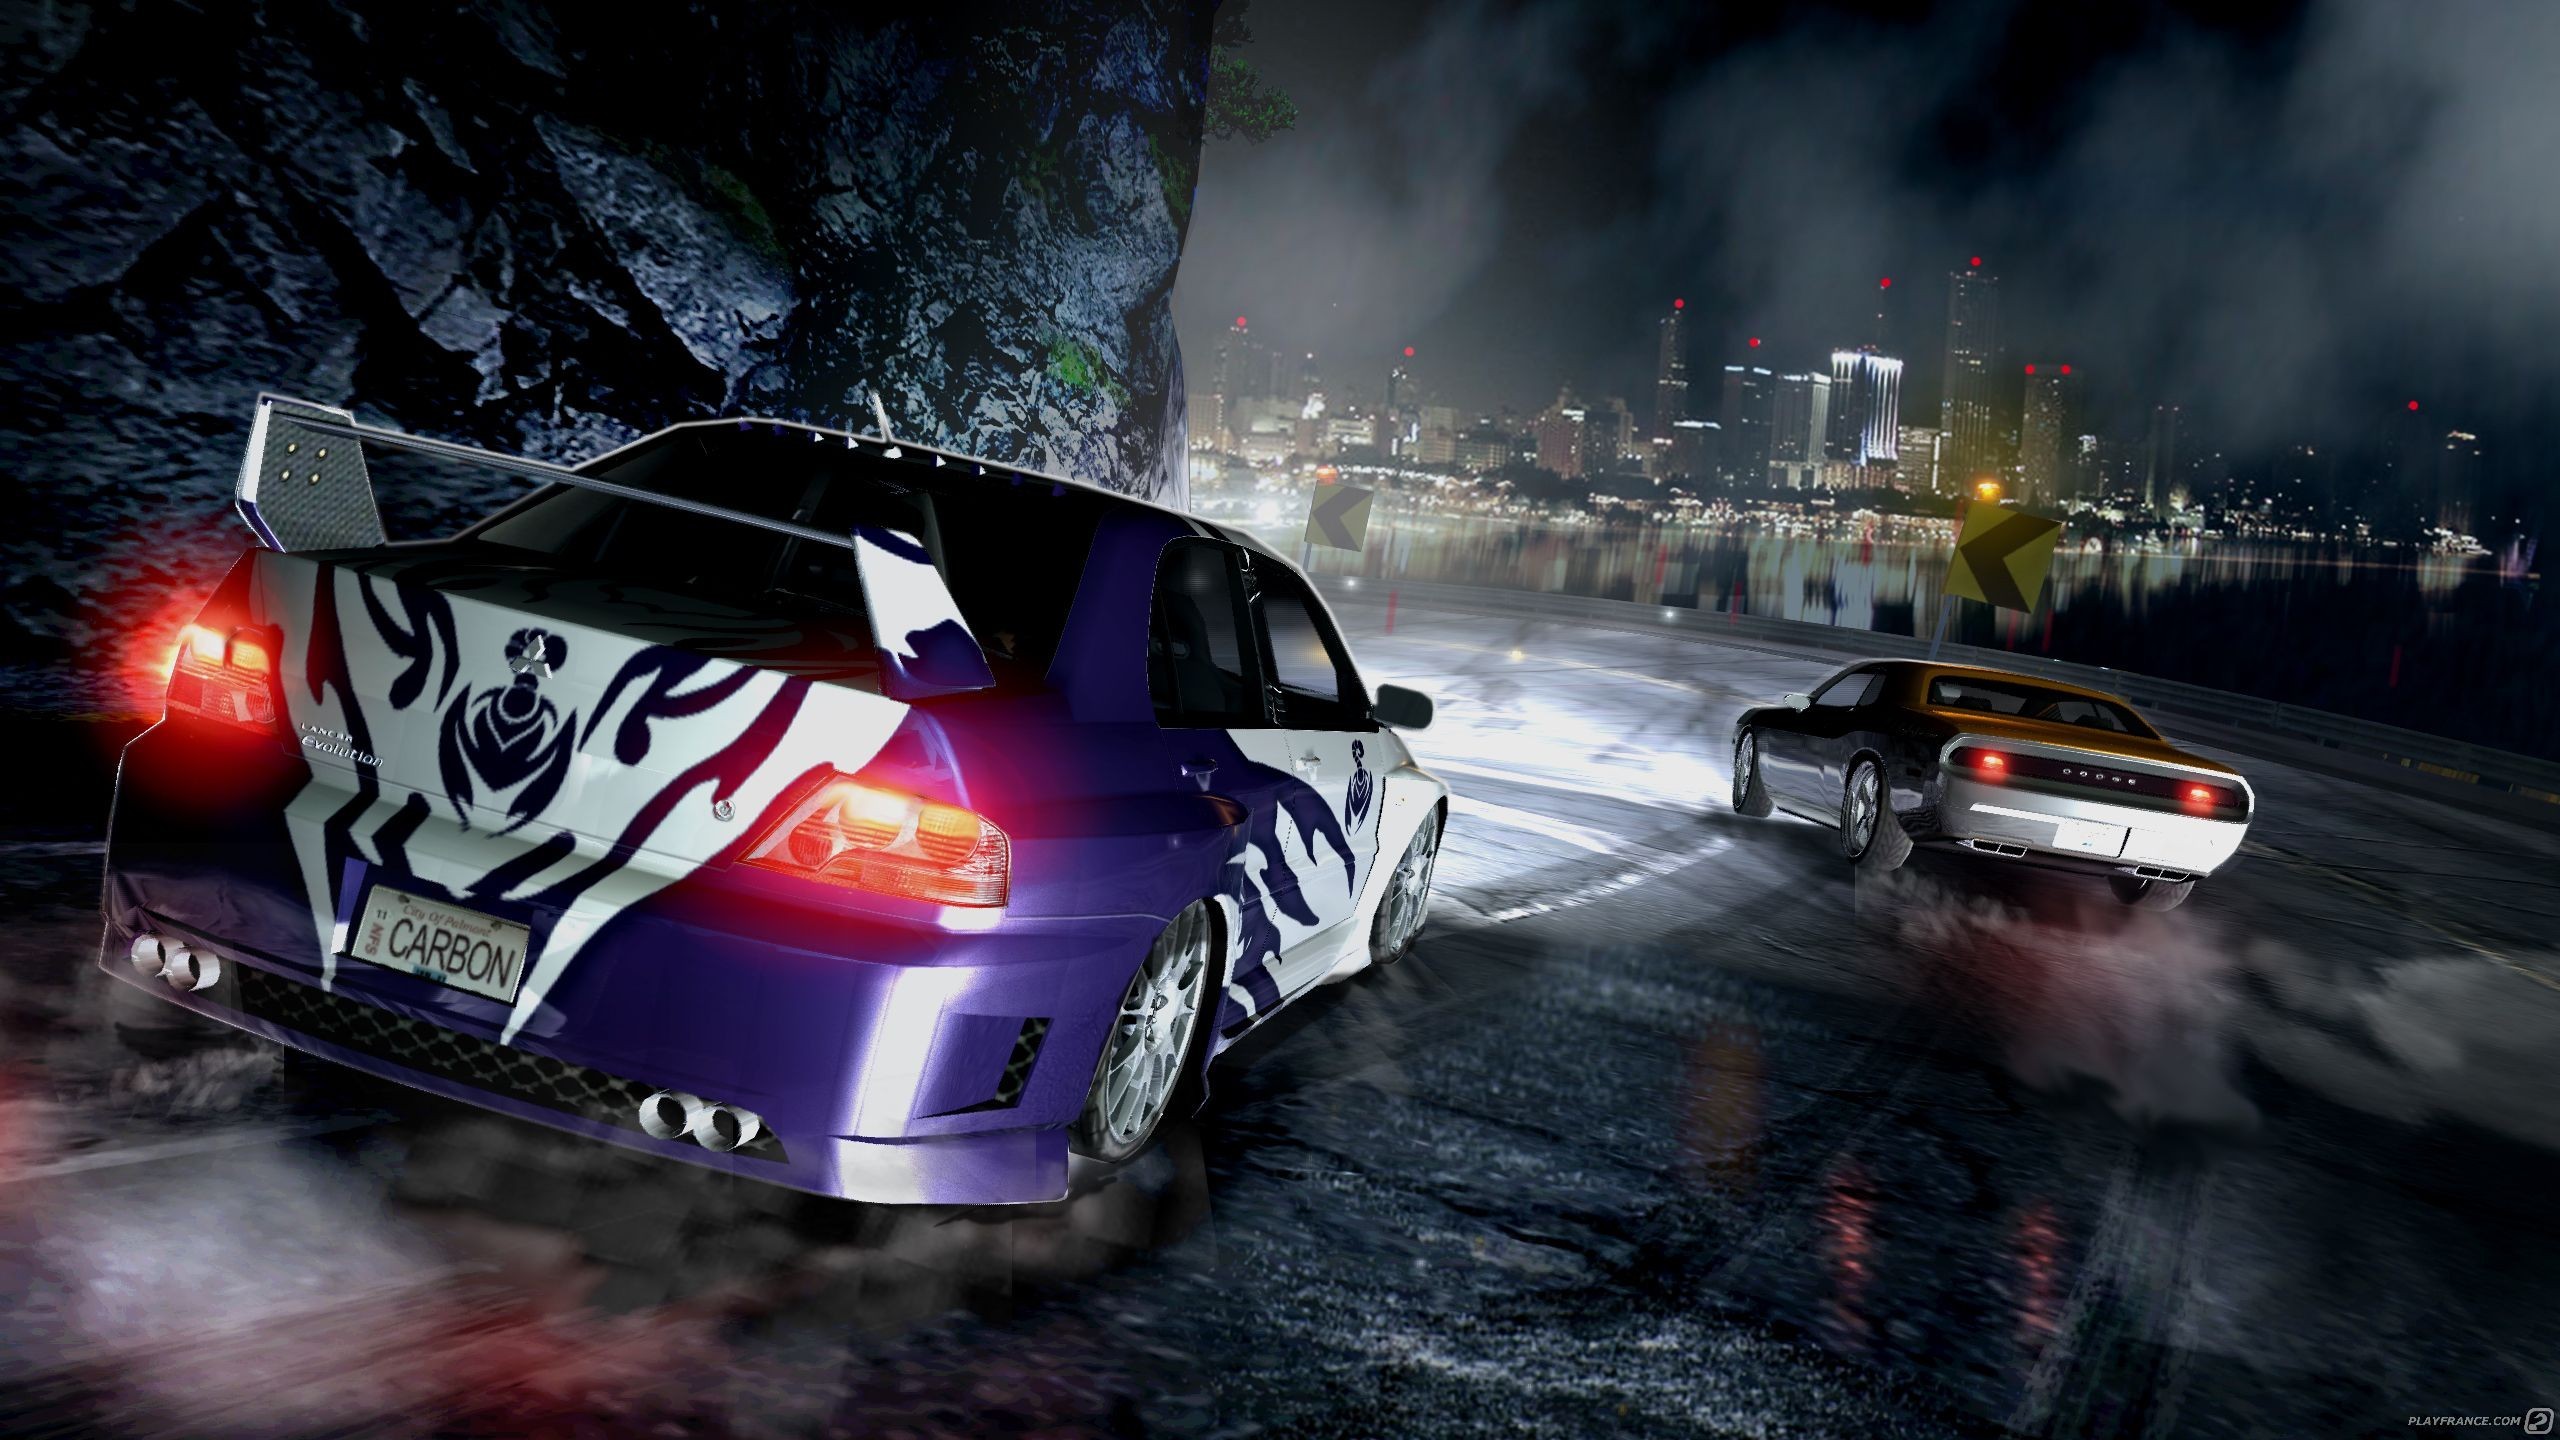 High Resolution Wallpaper | Need For Speed: Carbon 2560x1440 px